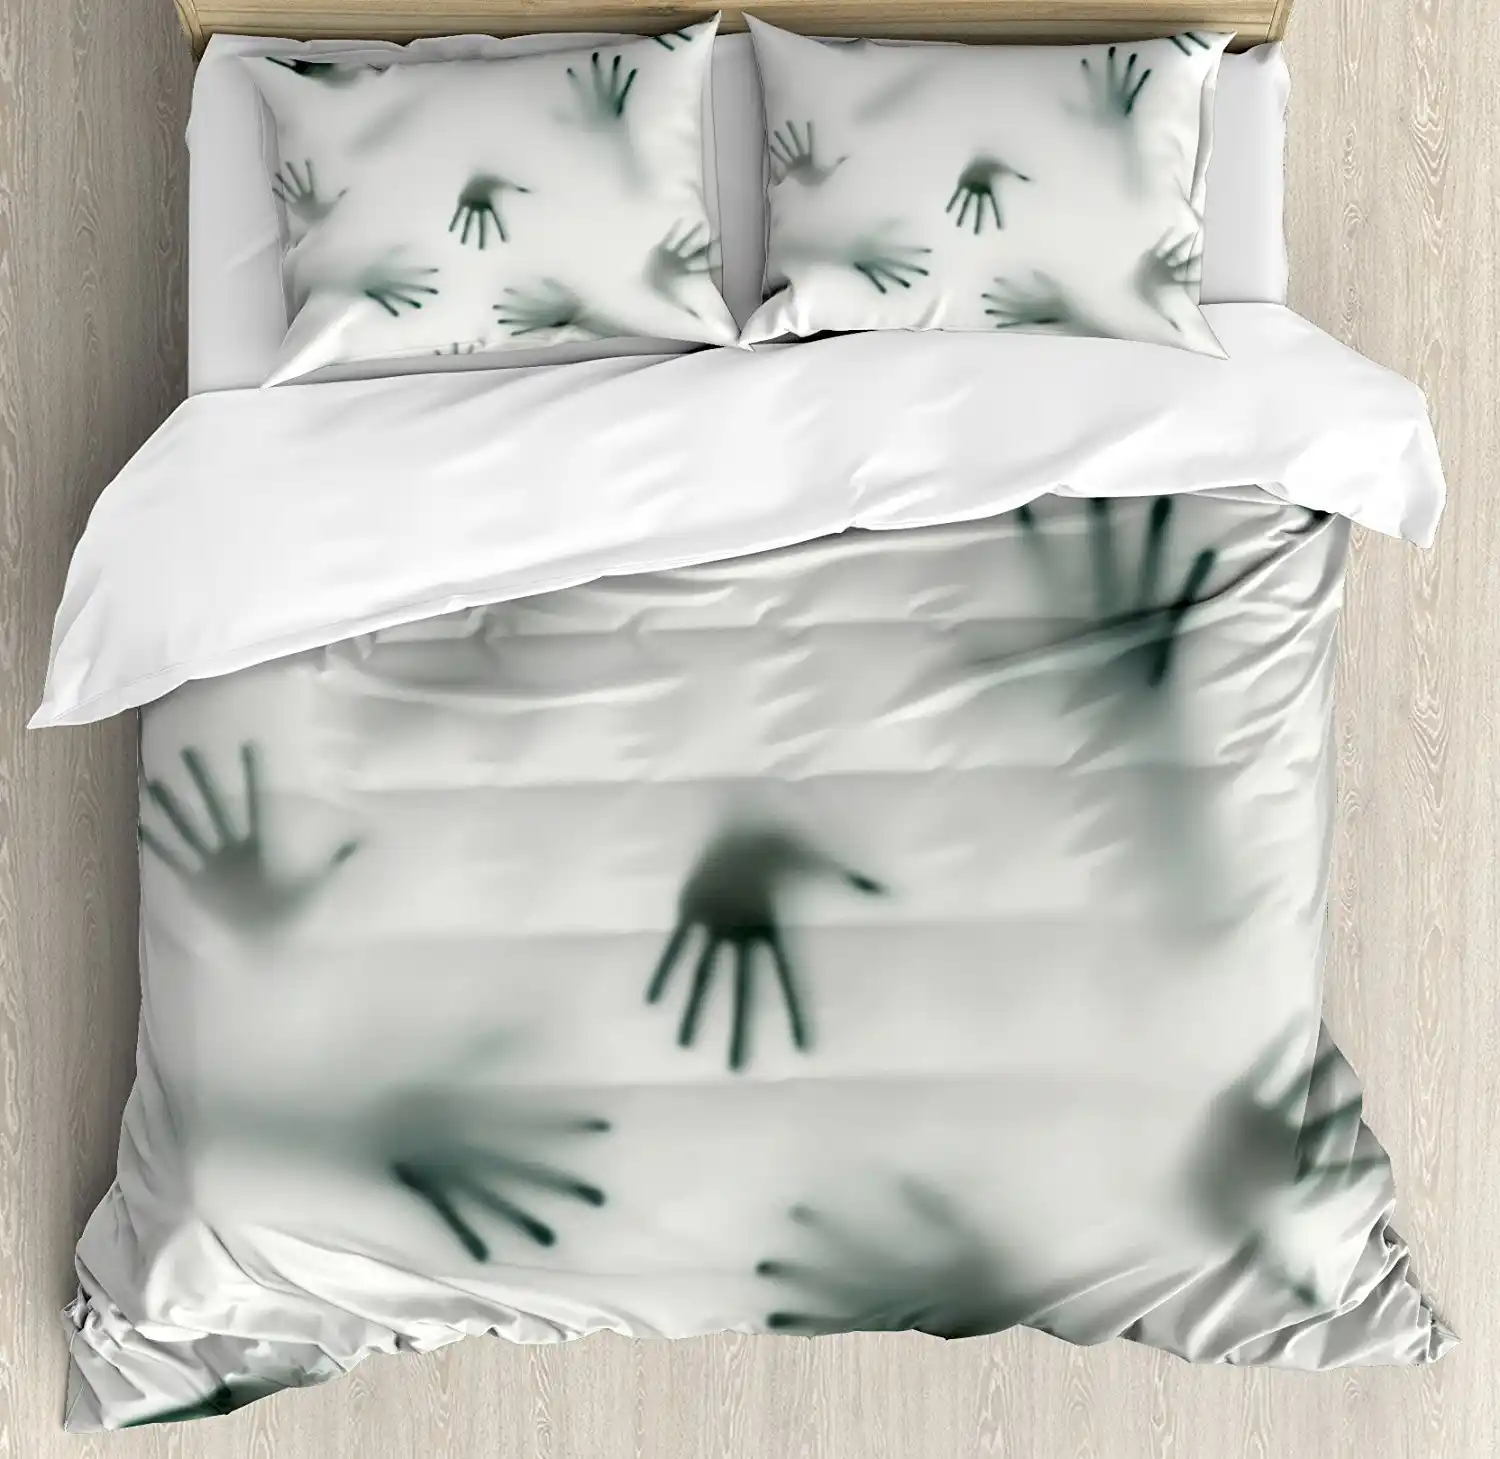 Horror House Duvet Cover Set Frightening Hands Arms Ghost Shadow